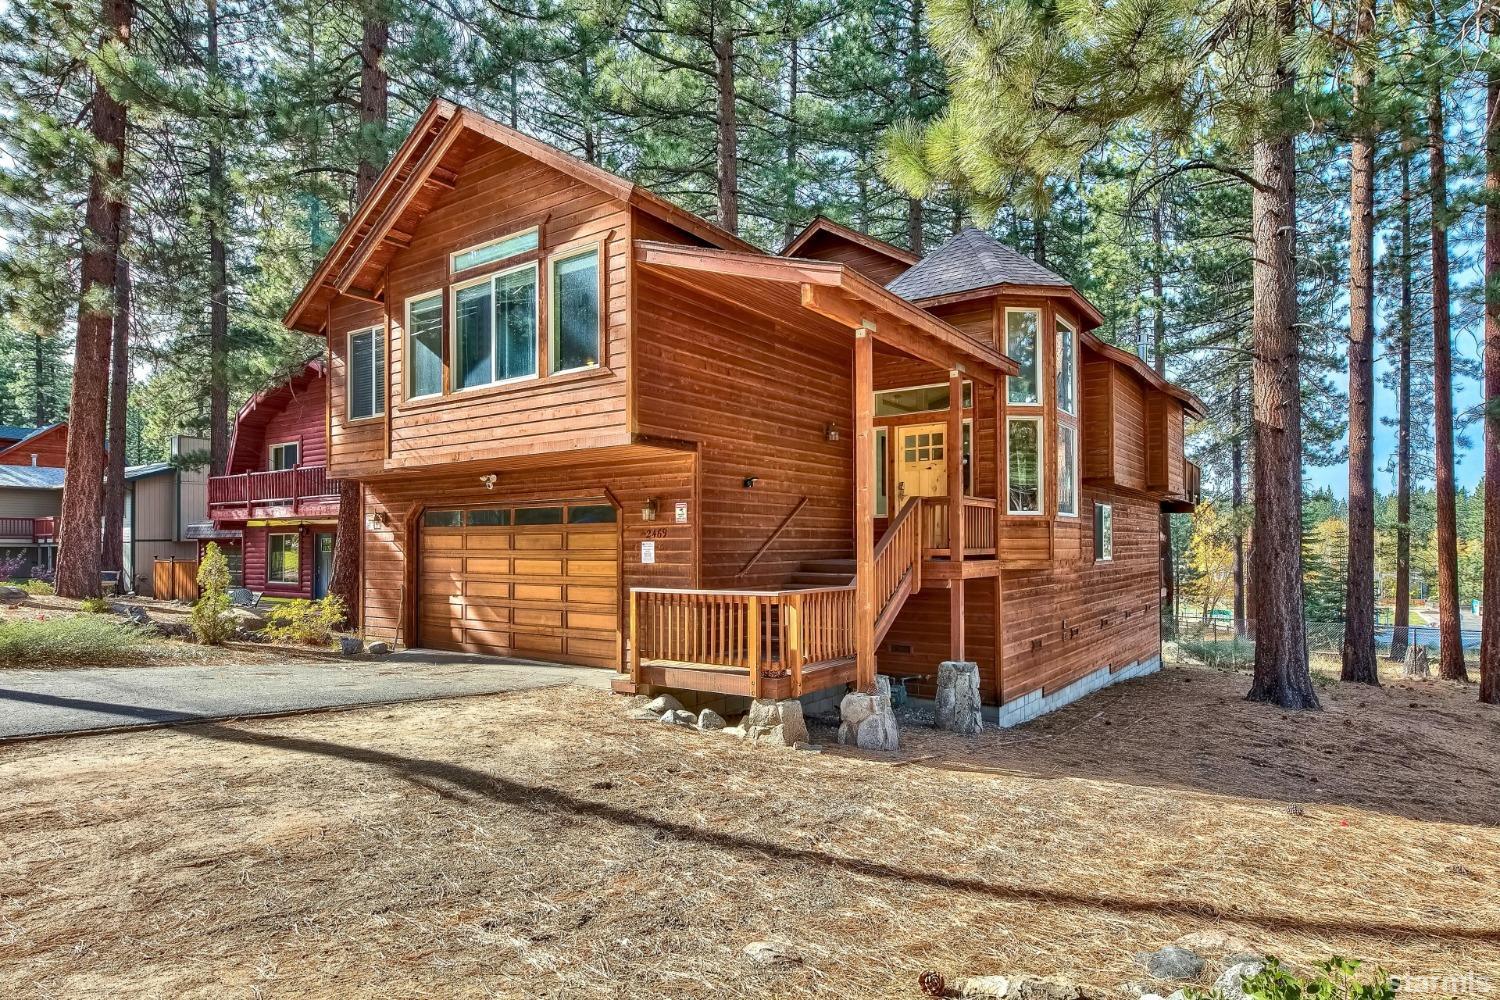 Sell My Home At Montgomery Estates In South Lake Tahoe